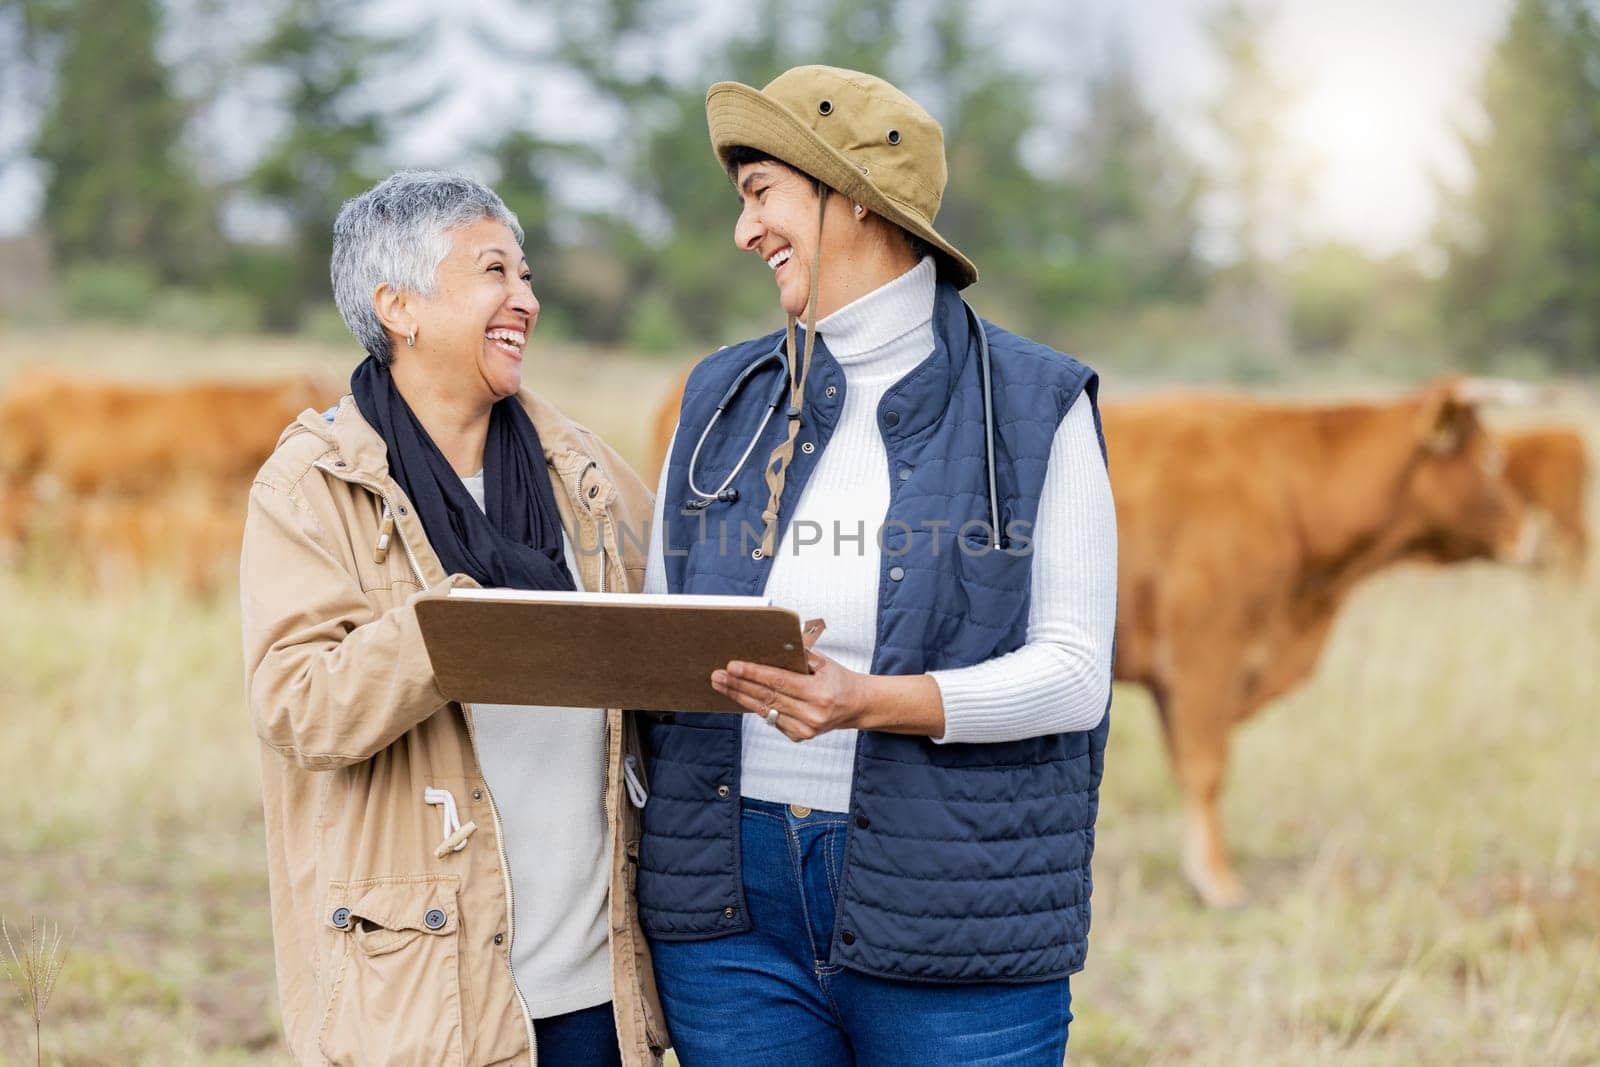 Cow, vet or senior farmer with checklist on field for meat, beef or cattle food industry inspection. Happy people farming livestock, cows or agriculture animals for milk production and management.